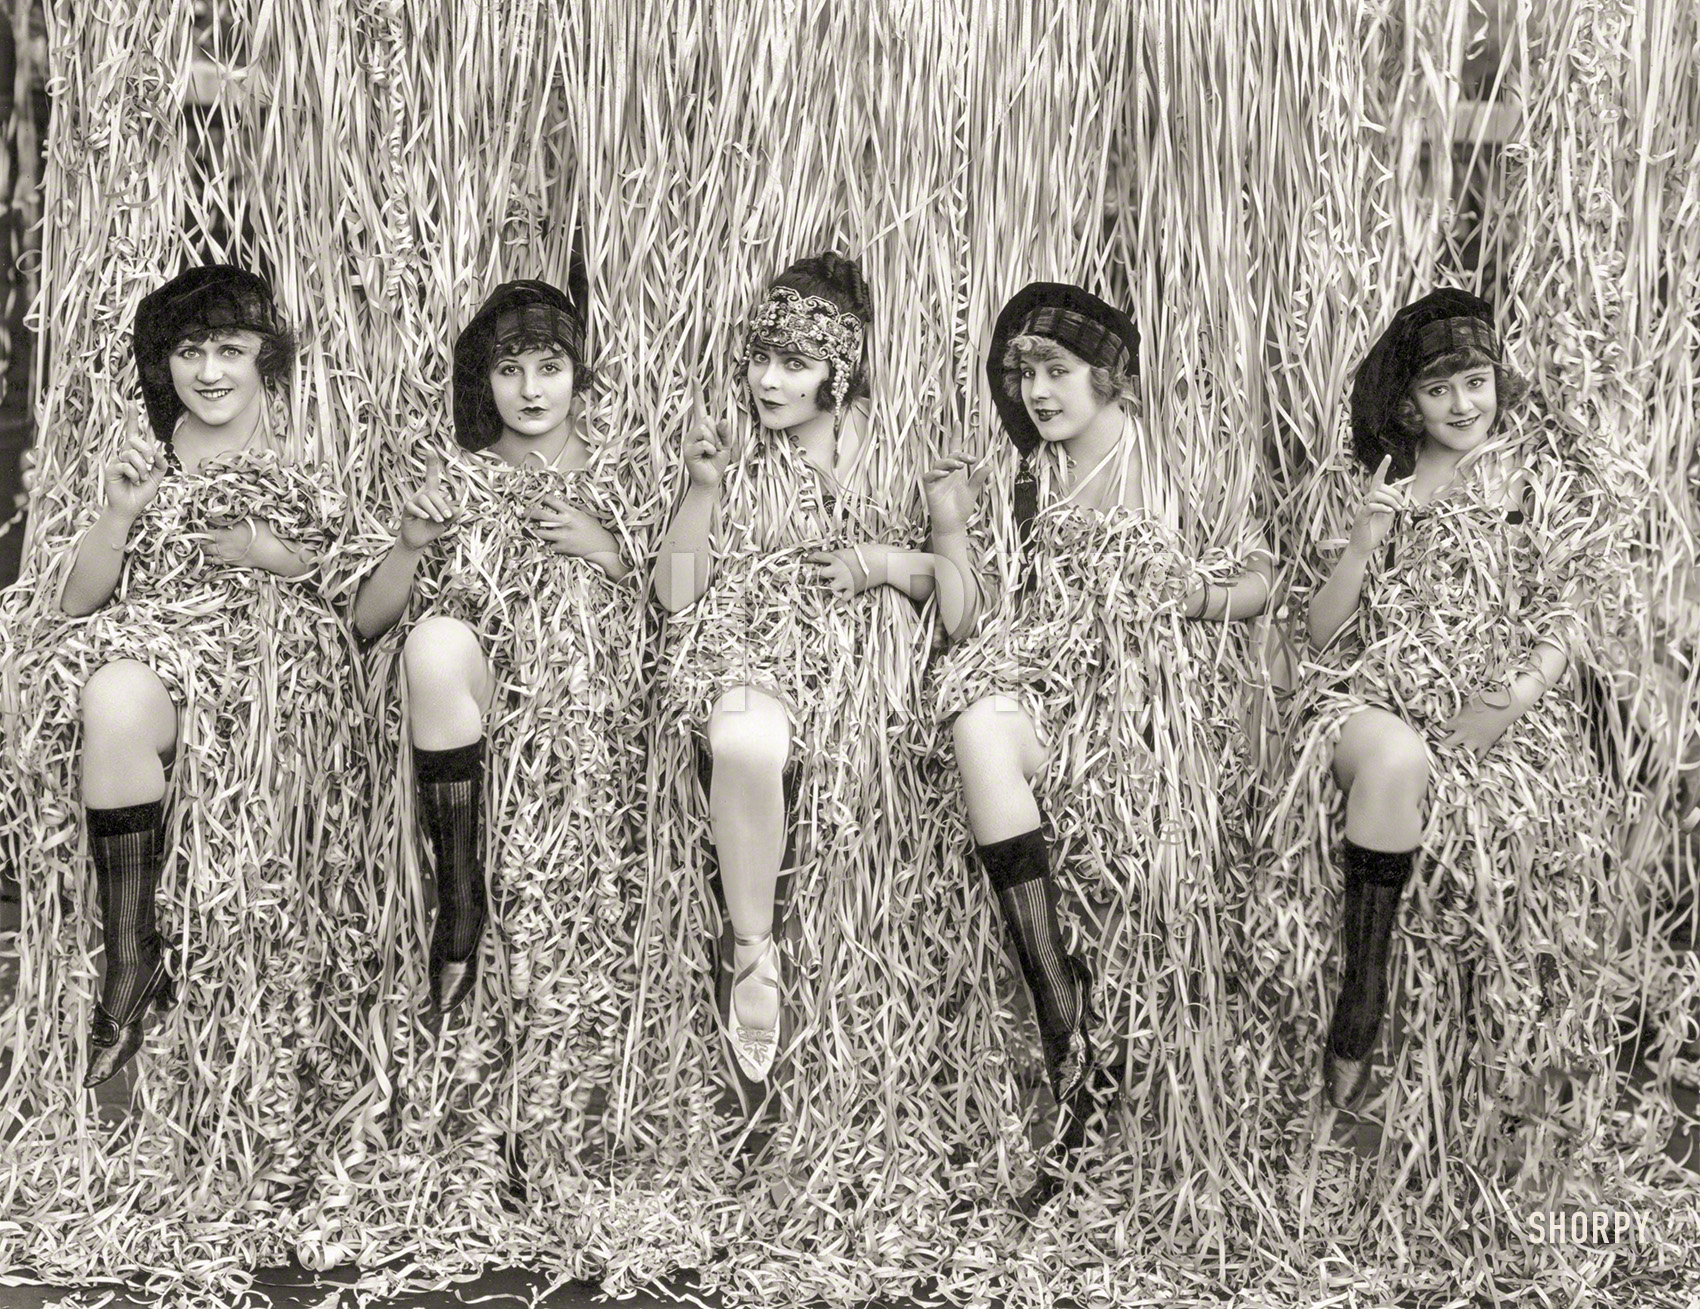 April 1918. "Five Mack Sennett girls provocatively posed amid serpentine confetti." Winners of the Shoscar® for Best Costume! Photo by Evans, L.A. View full size.